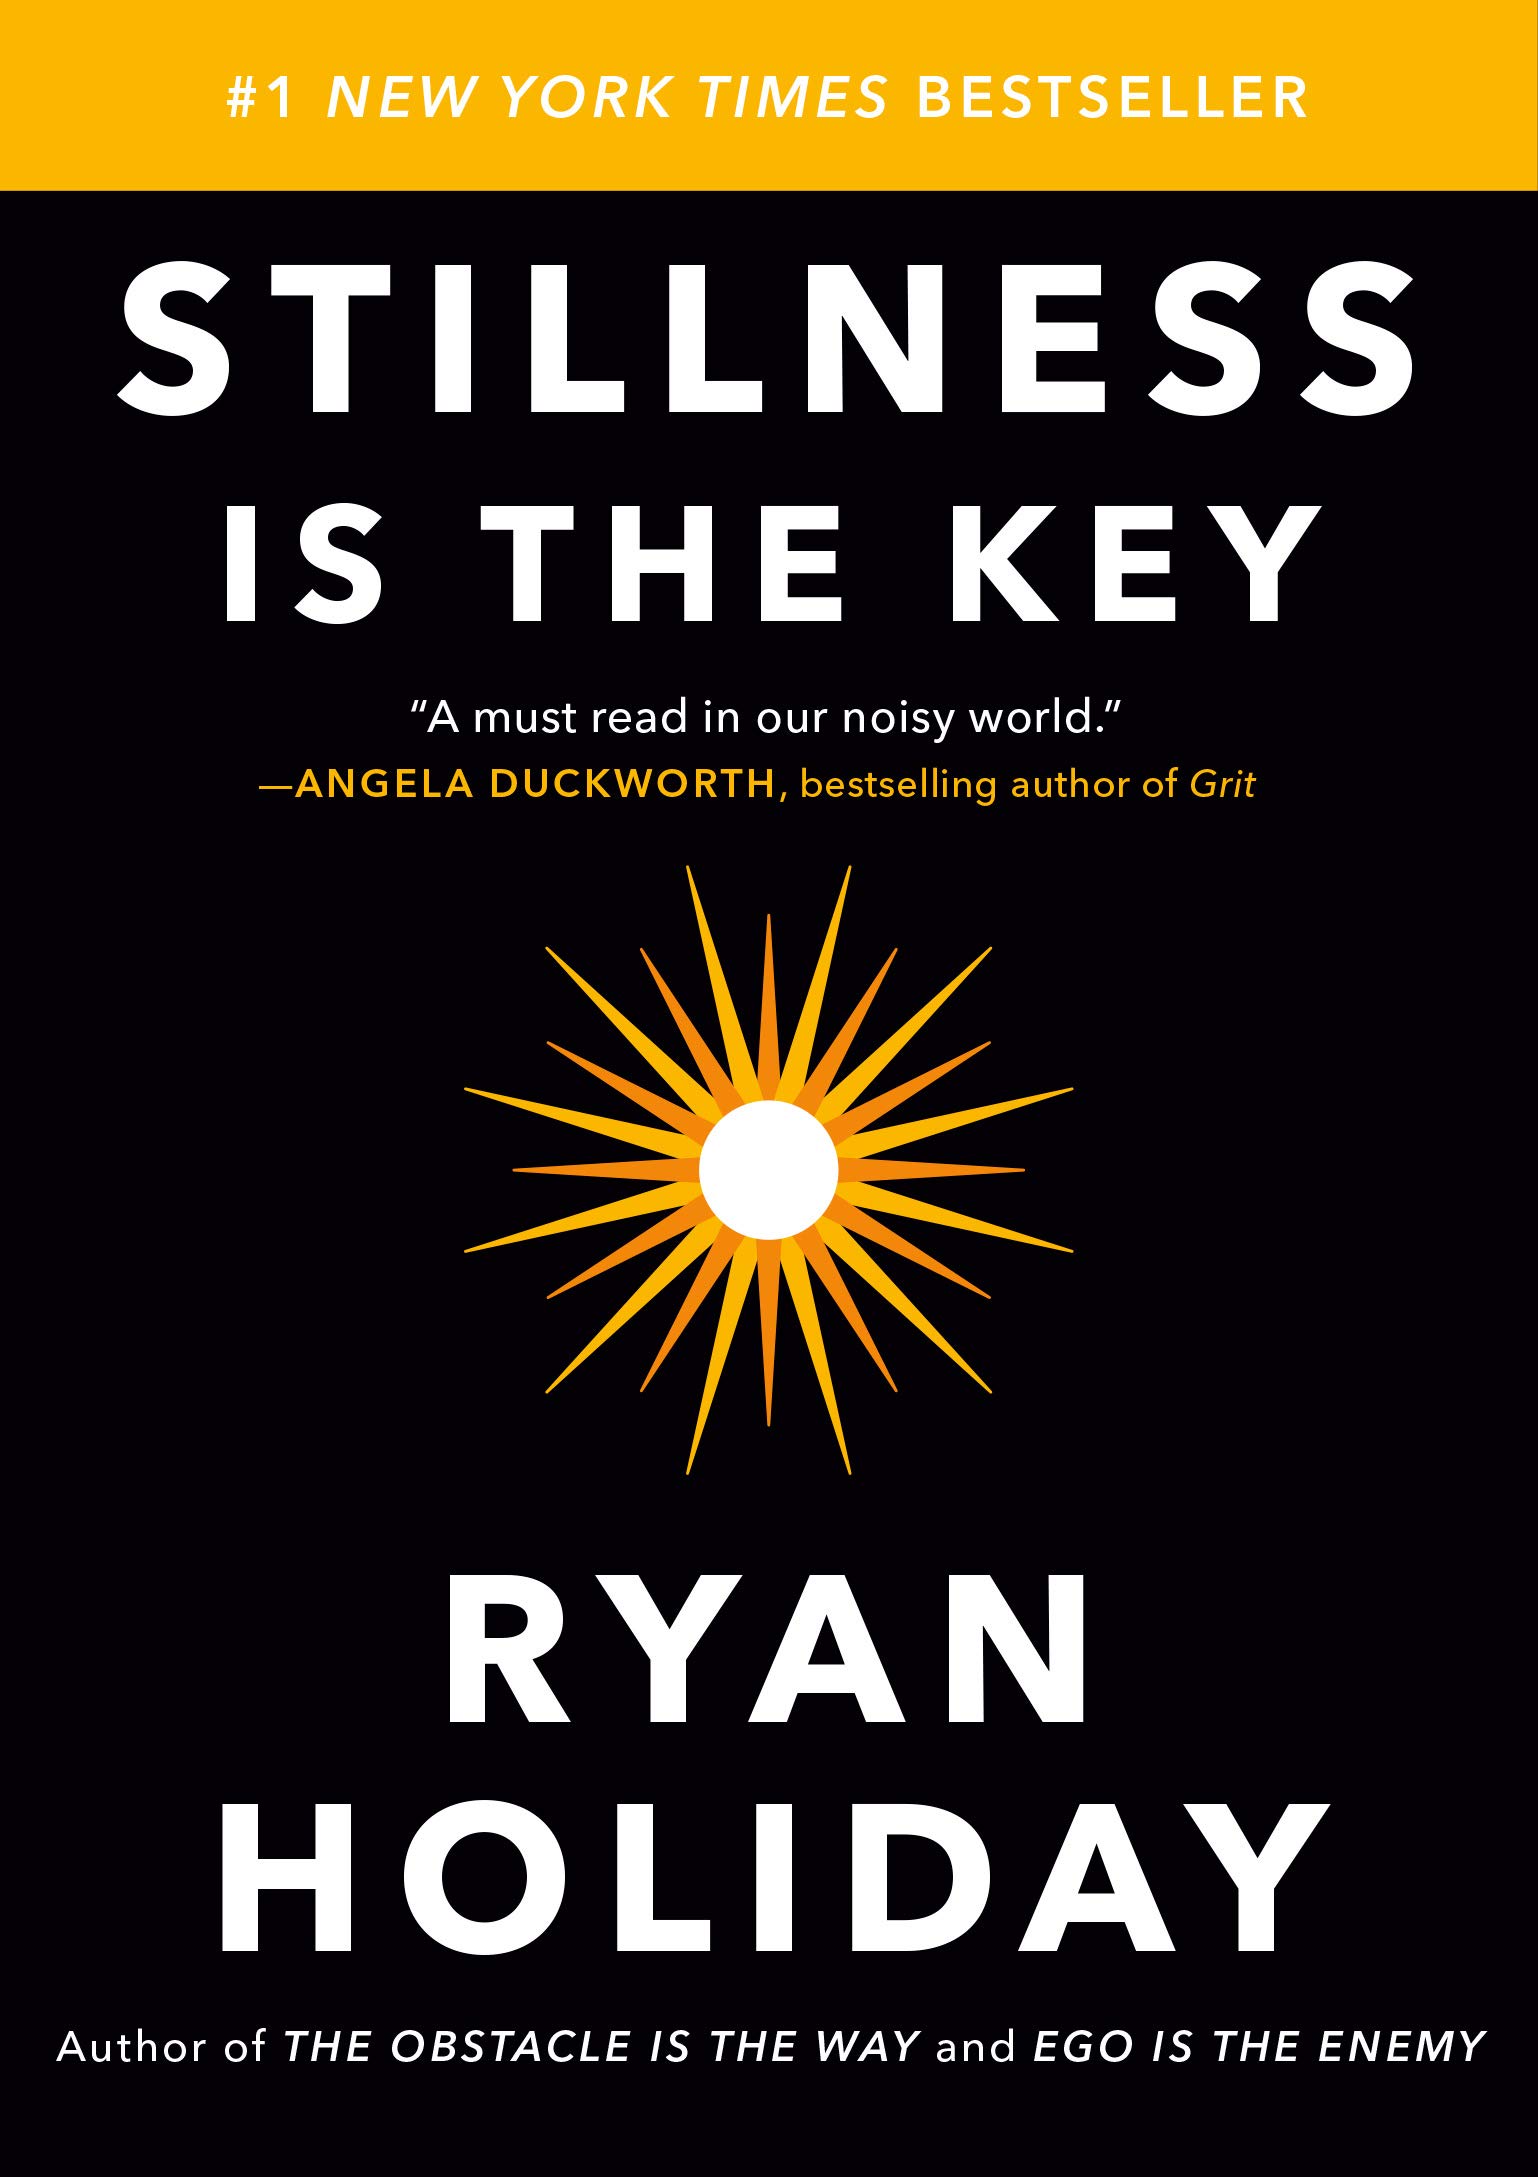 Book image of Stillness is the key.